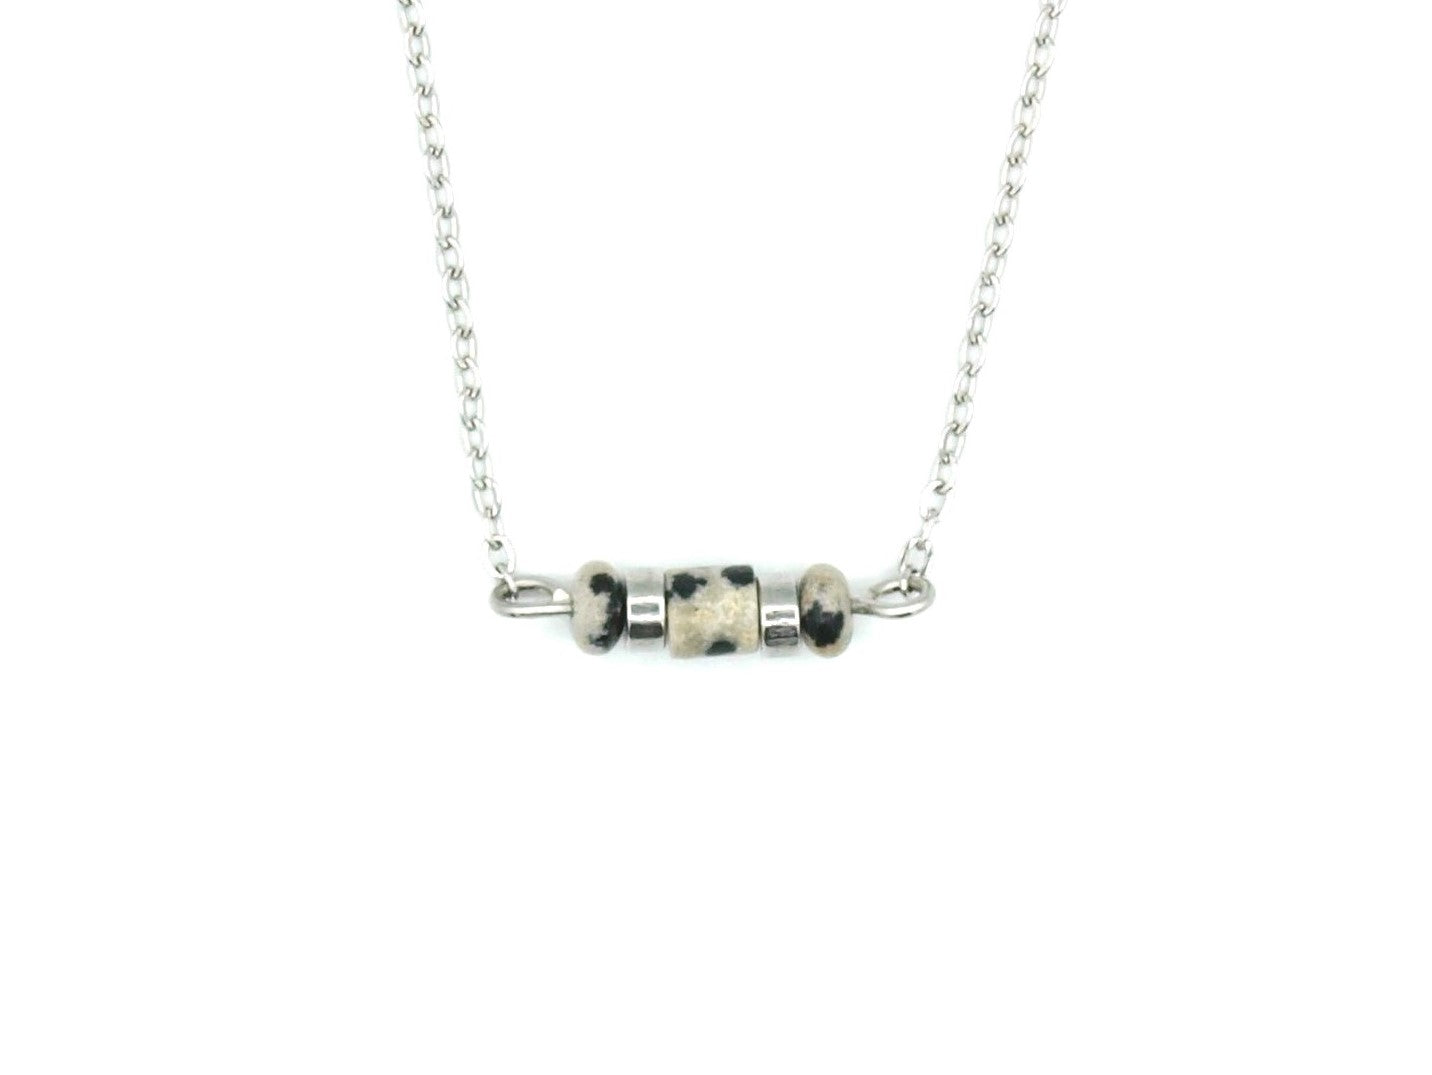 Necklace Iris dalmatian jasper, silver and gold stainless steel